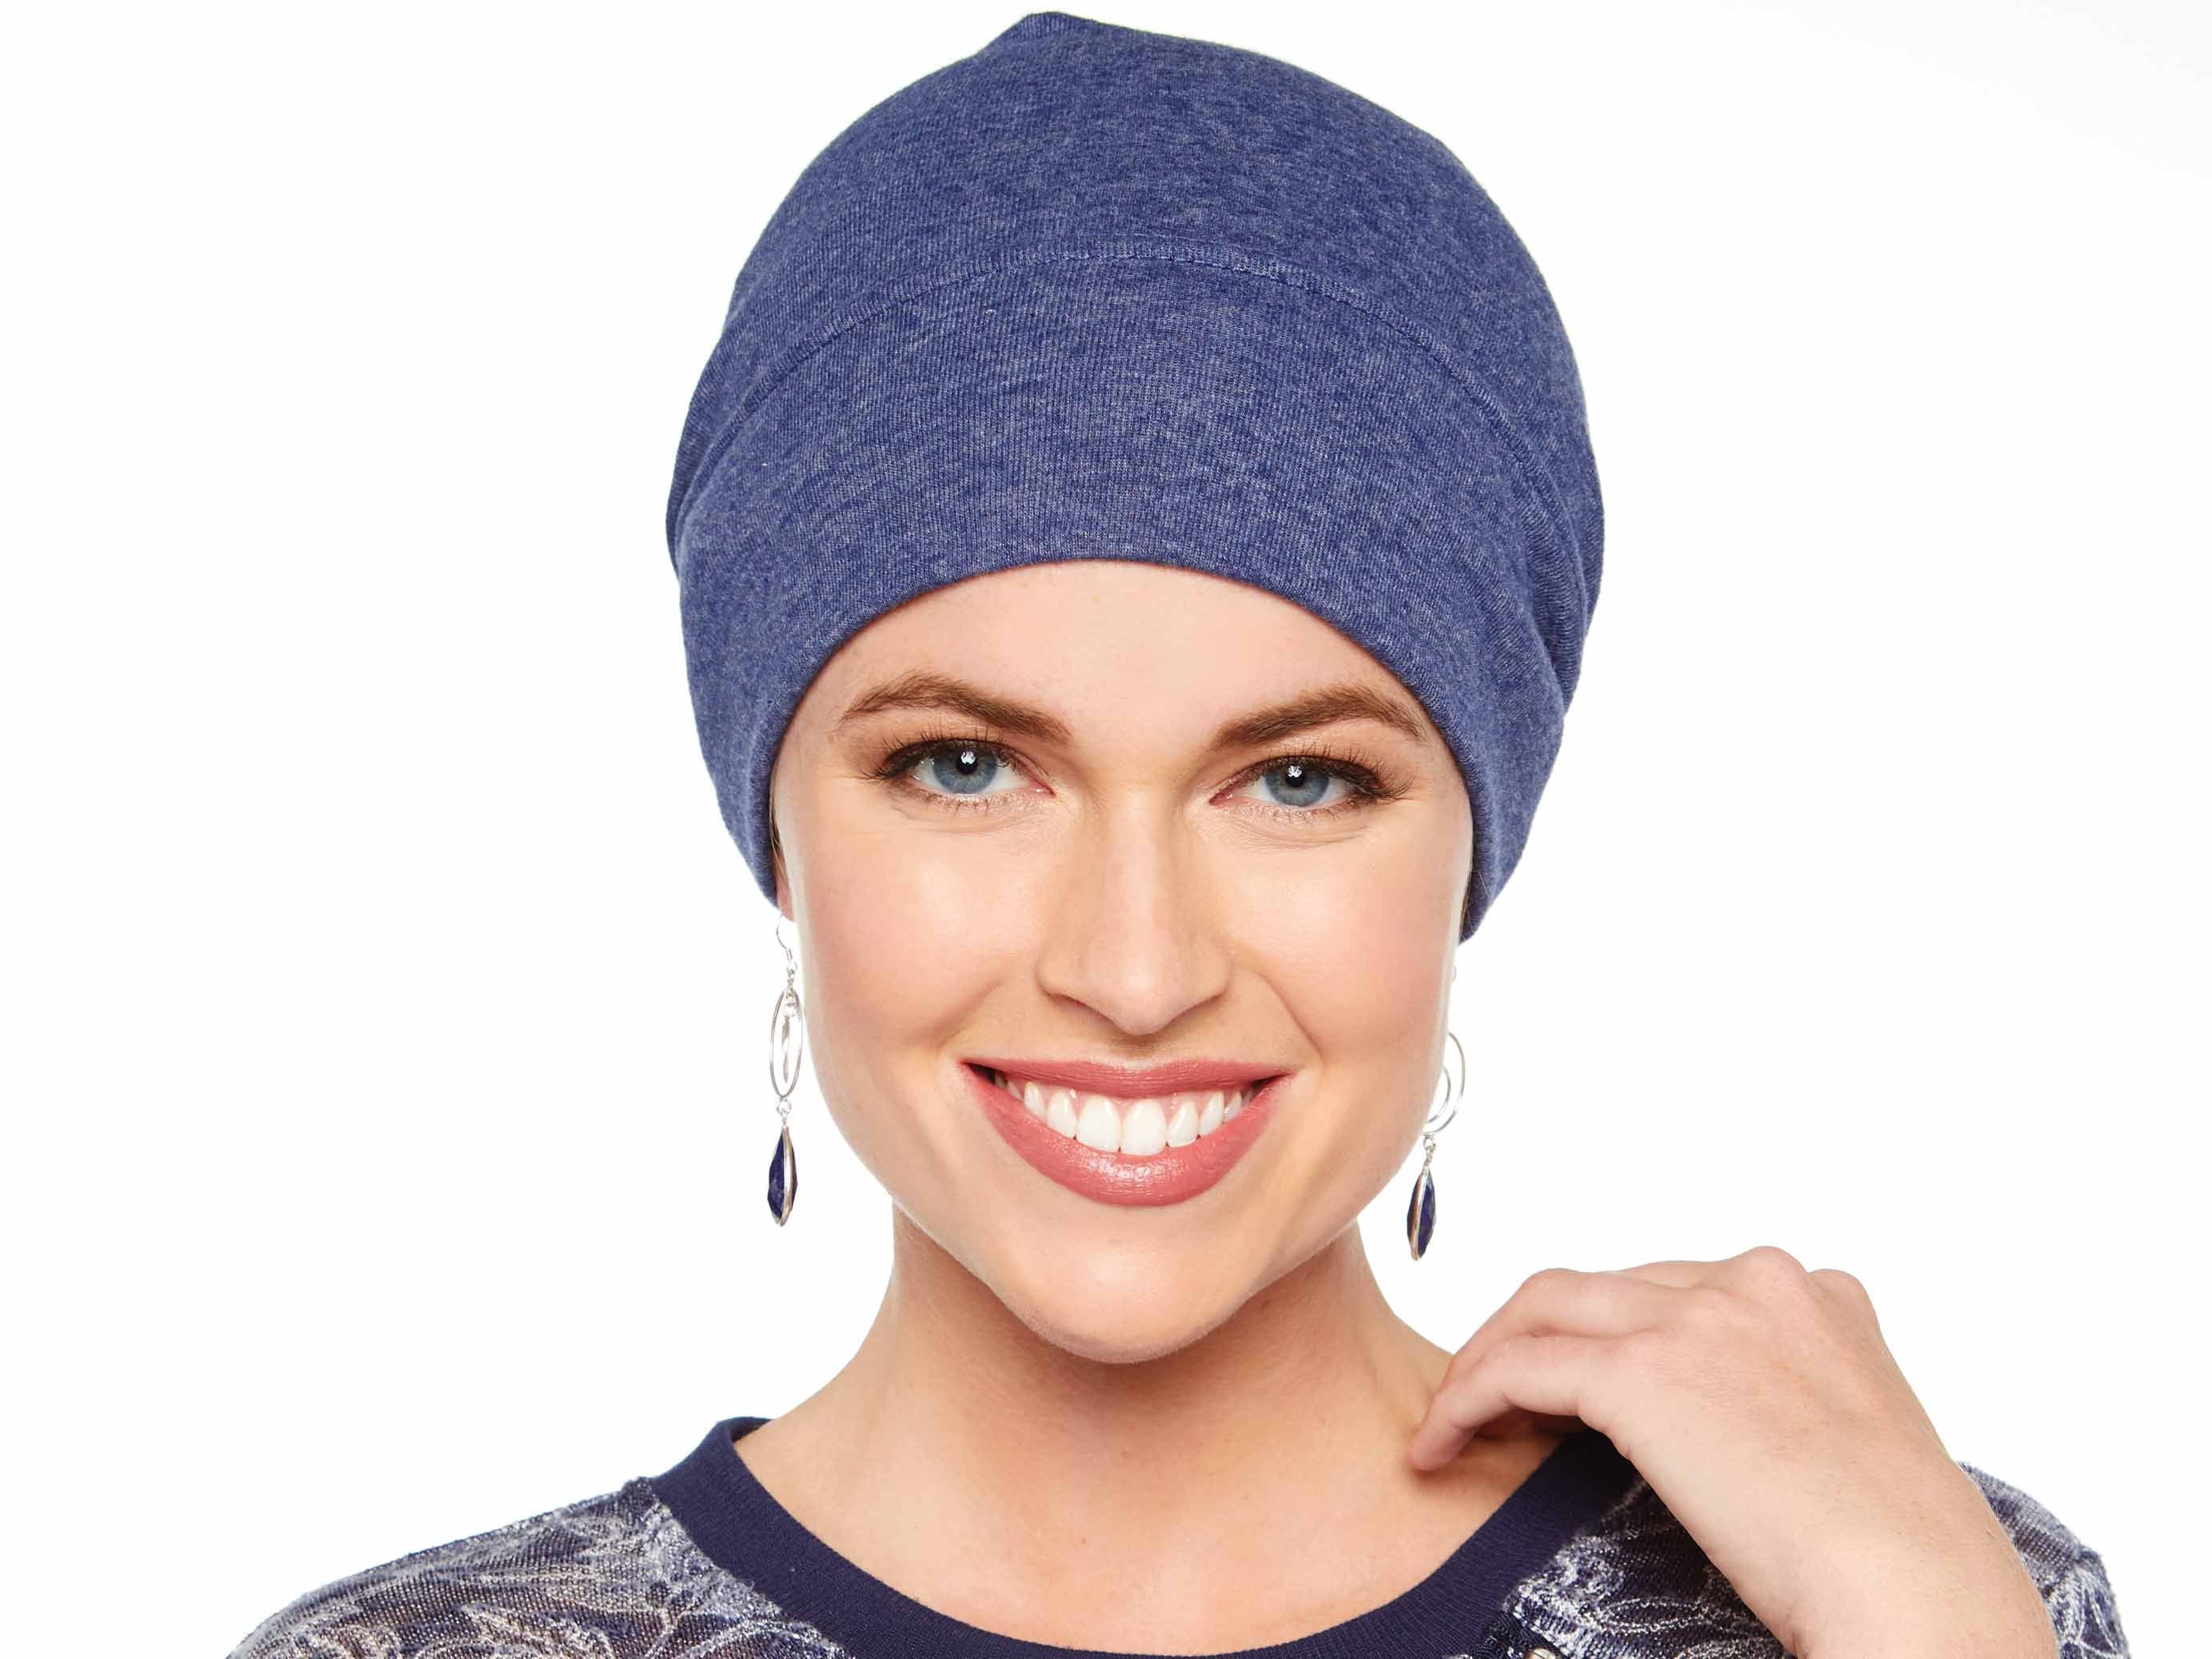 Head Covering Chemo Headwear Tams Hat Chemo Beanie Chemo Hat Hats for Cancer Patients Cotton Hat Women Beanie Hat Beanie Headwear